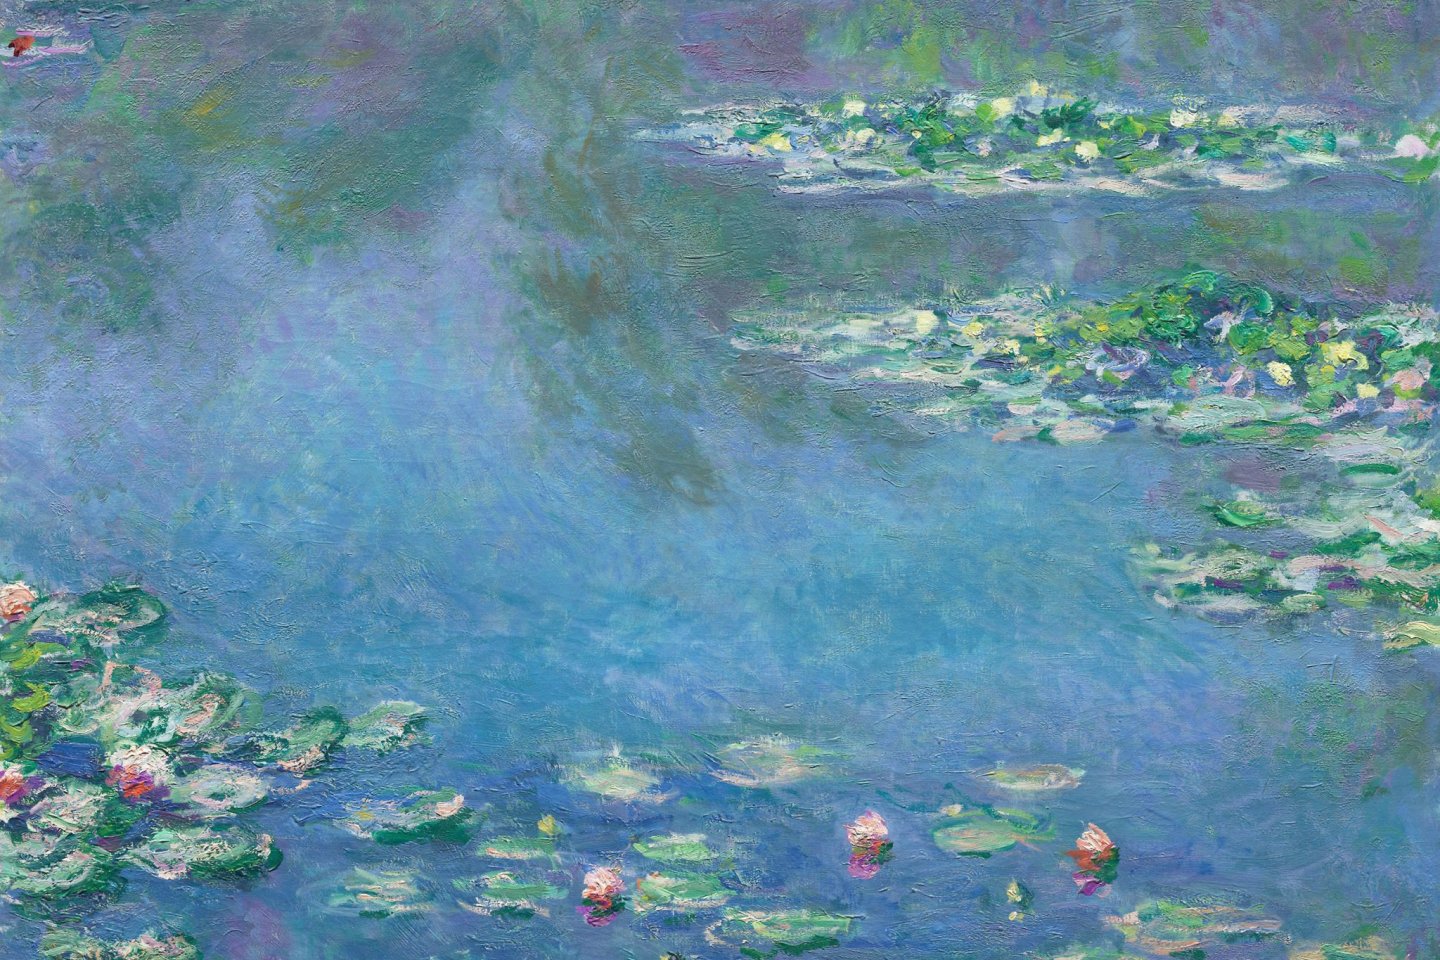 Works by Claude Monet will be featured at the event